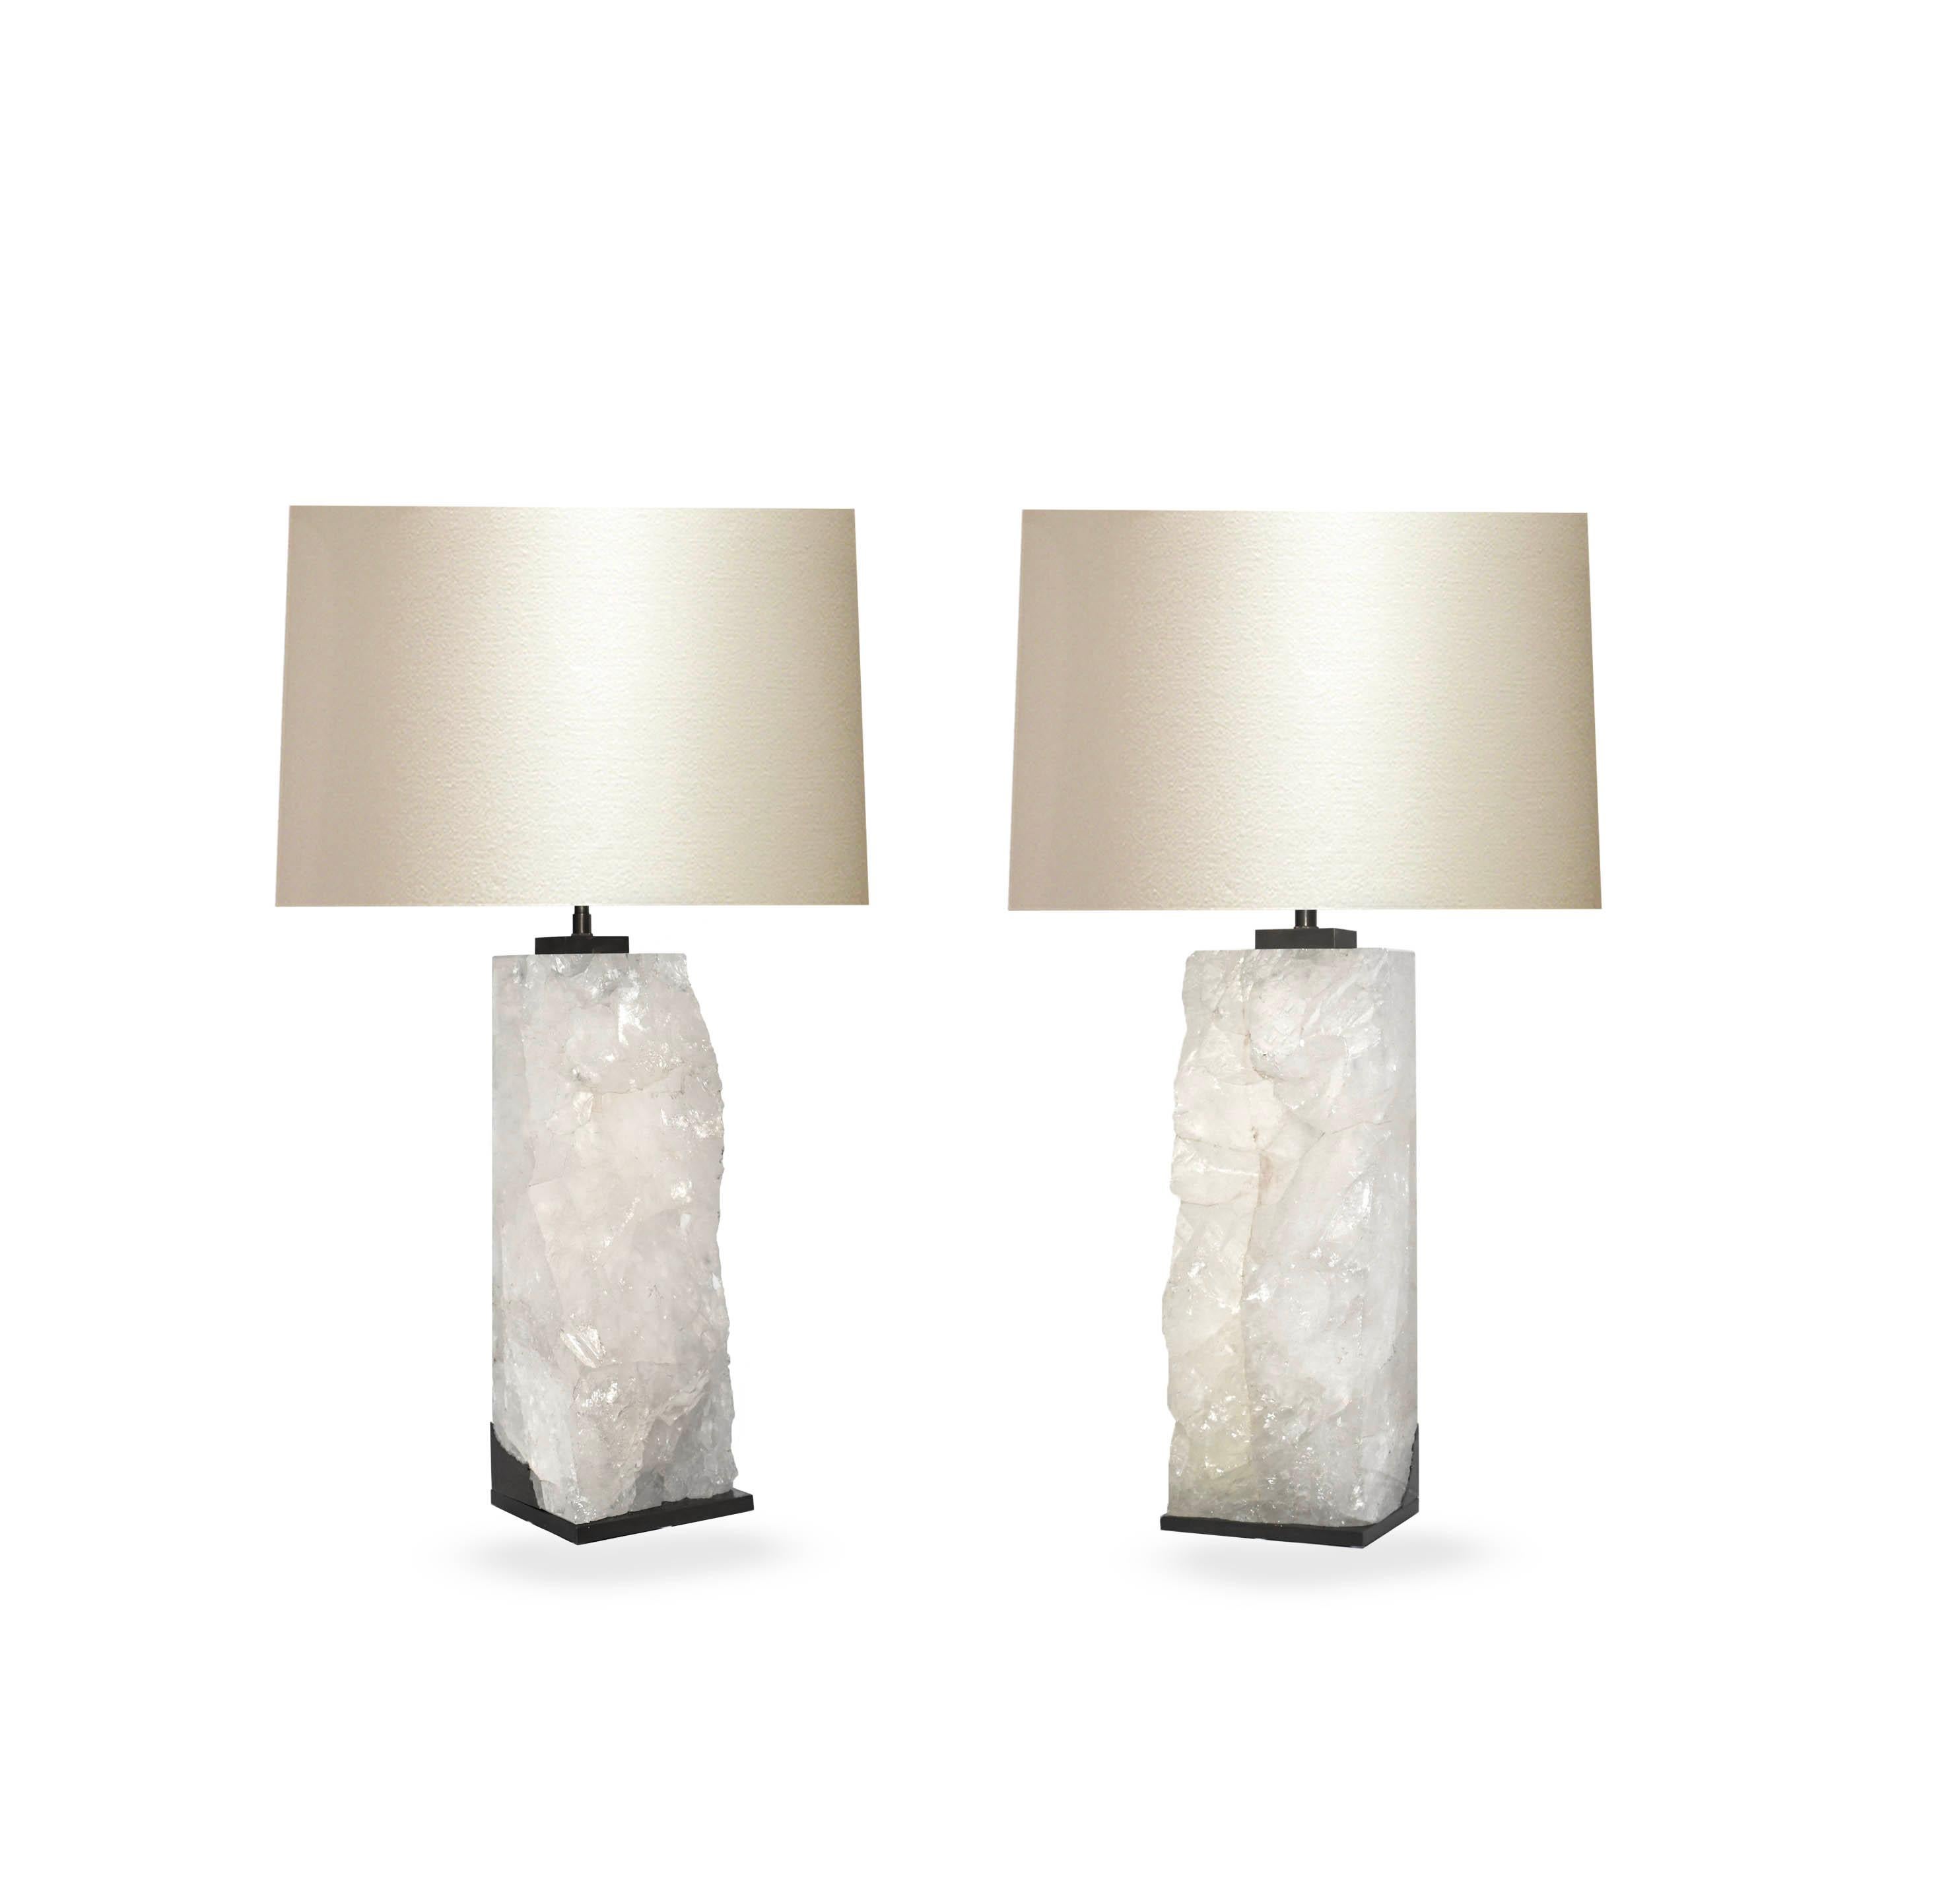 Rare pair of natural rock crystal lamps. Created by Phoenix Gallery, NYC.
To the top of rock crystal: 16